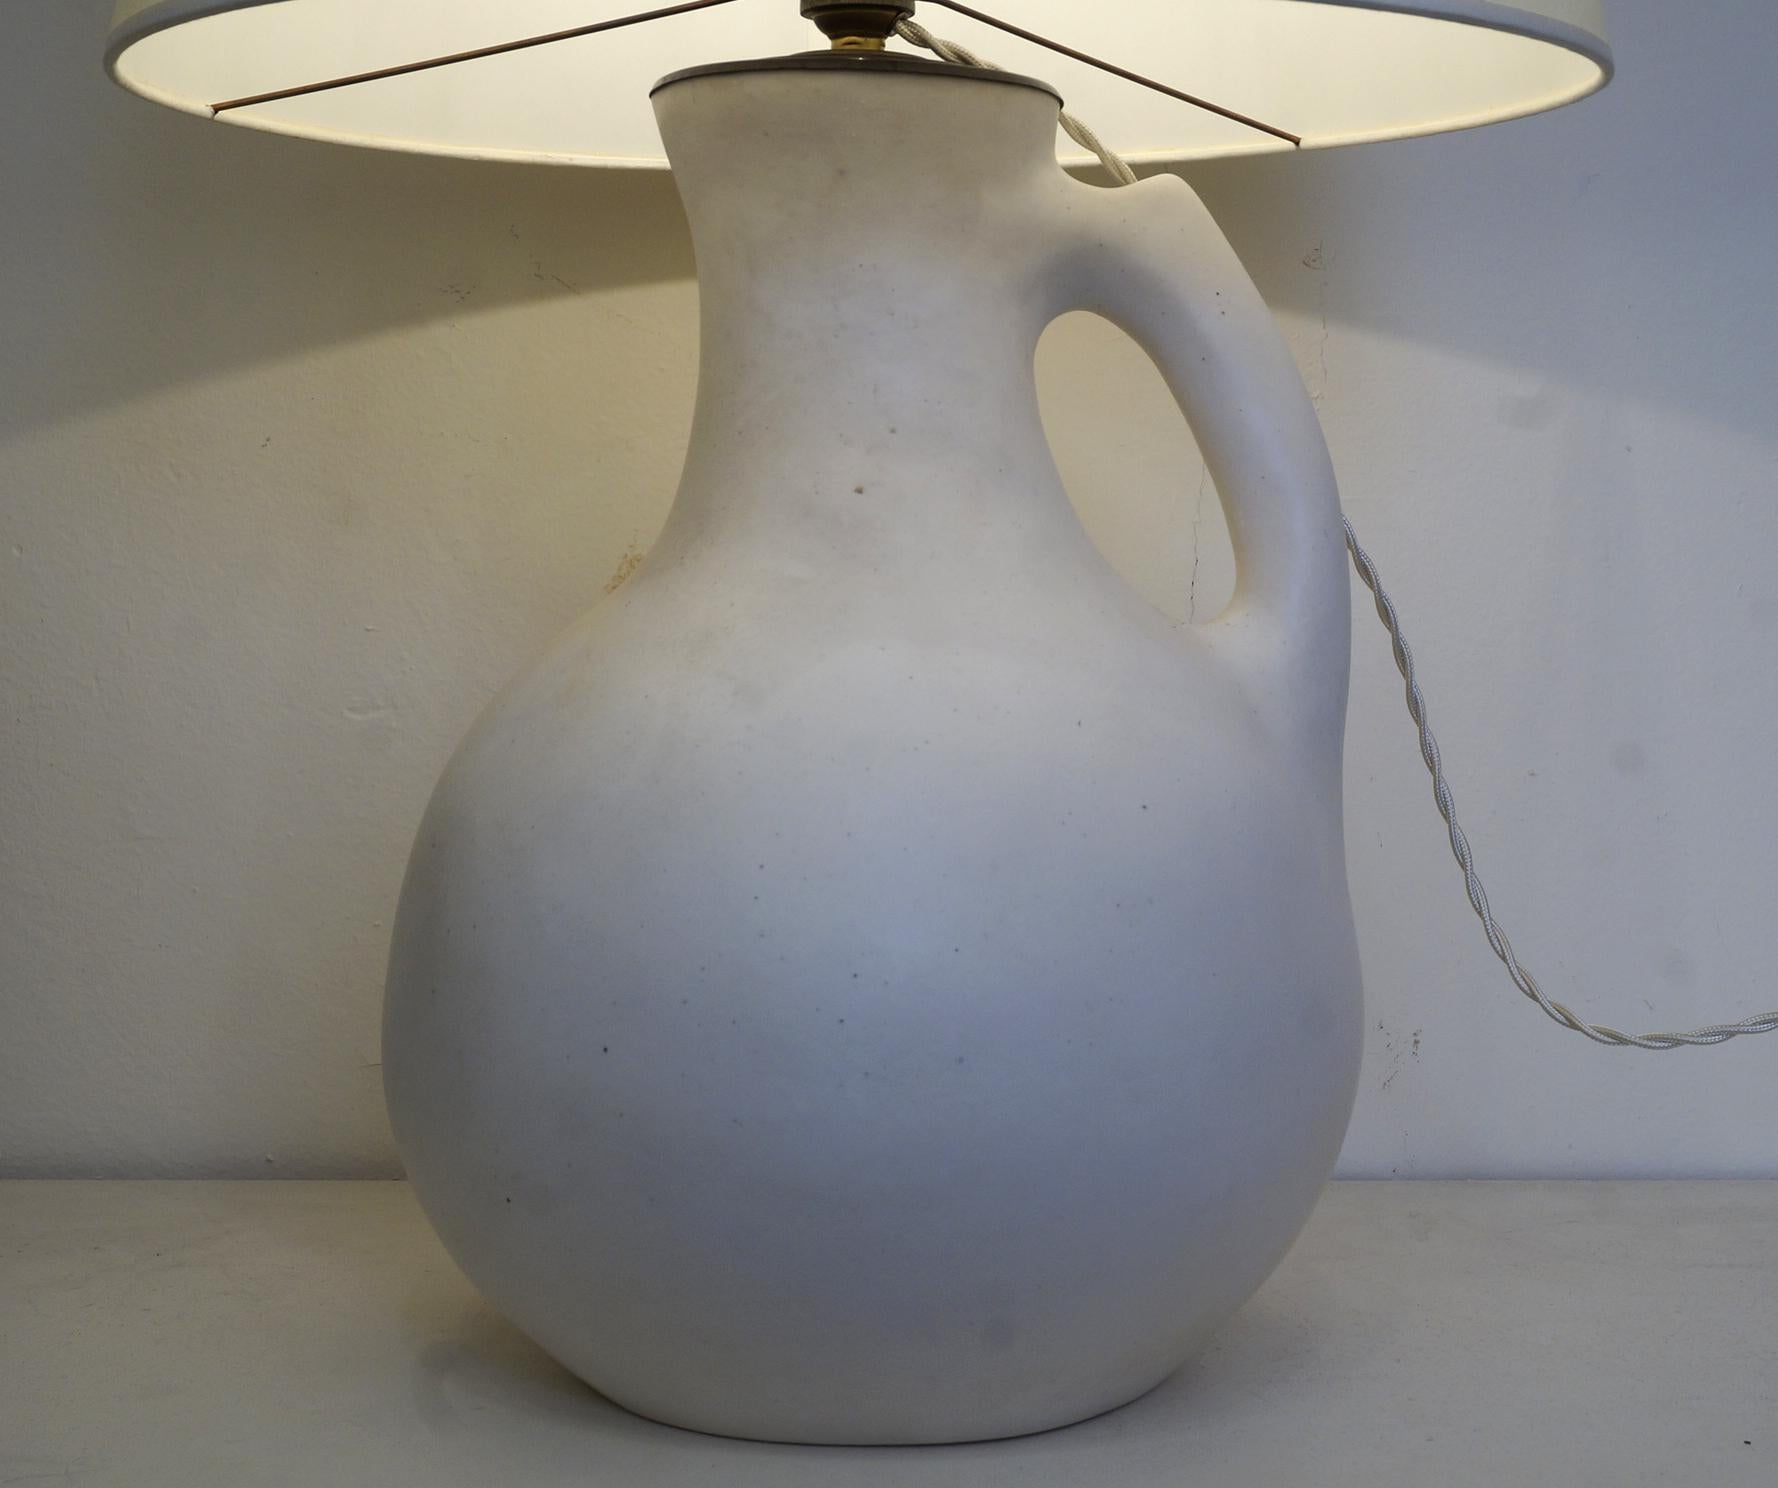 White enameled ceramic table lamp, custom made fabric lampshade,
 rewired with twisted silk cord.

Measures: Ceramic body height 34 cm – 13.4 in.
Height with lampshade 60 cm - 23.6 in.